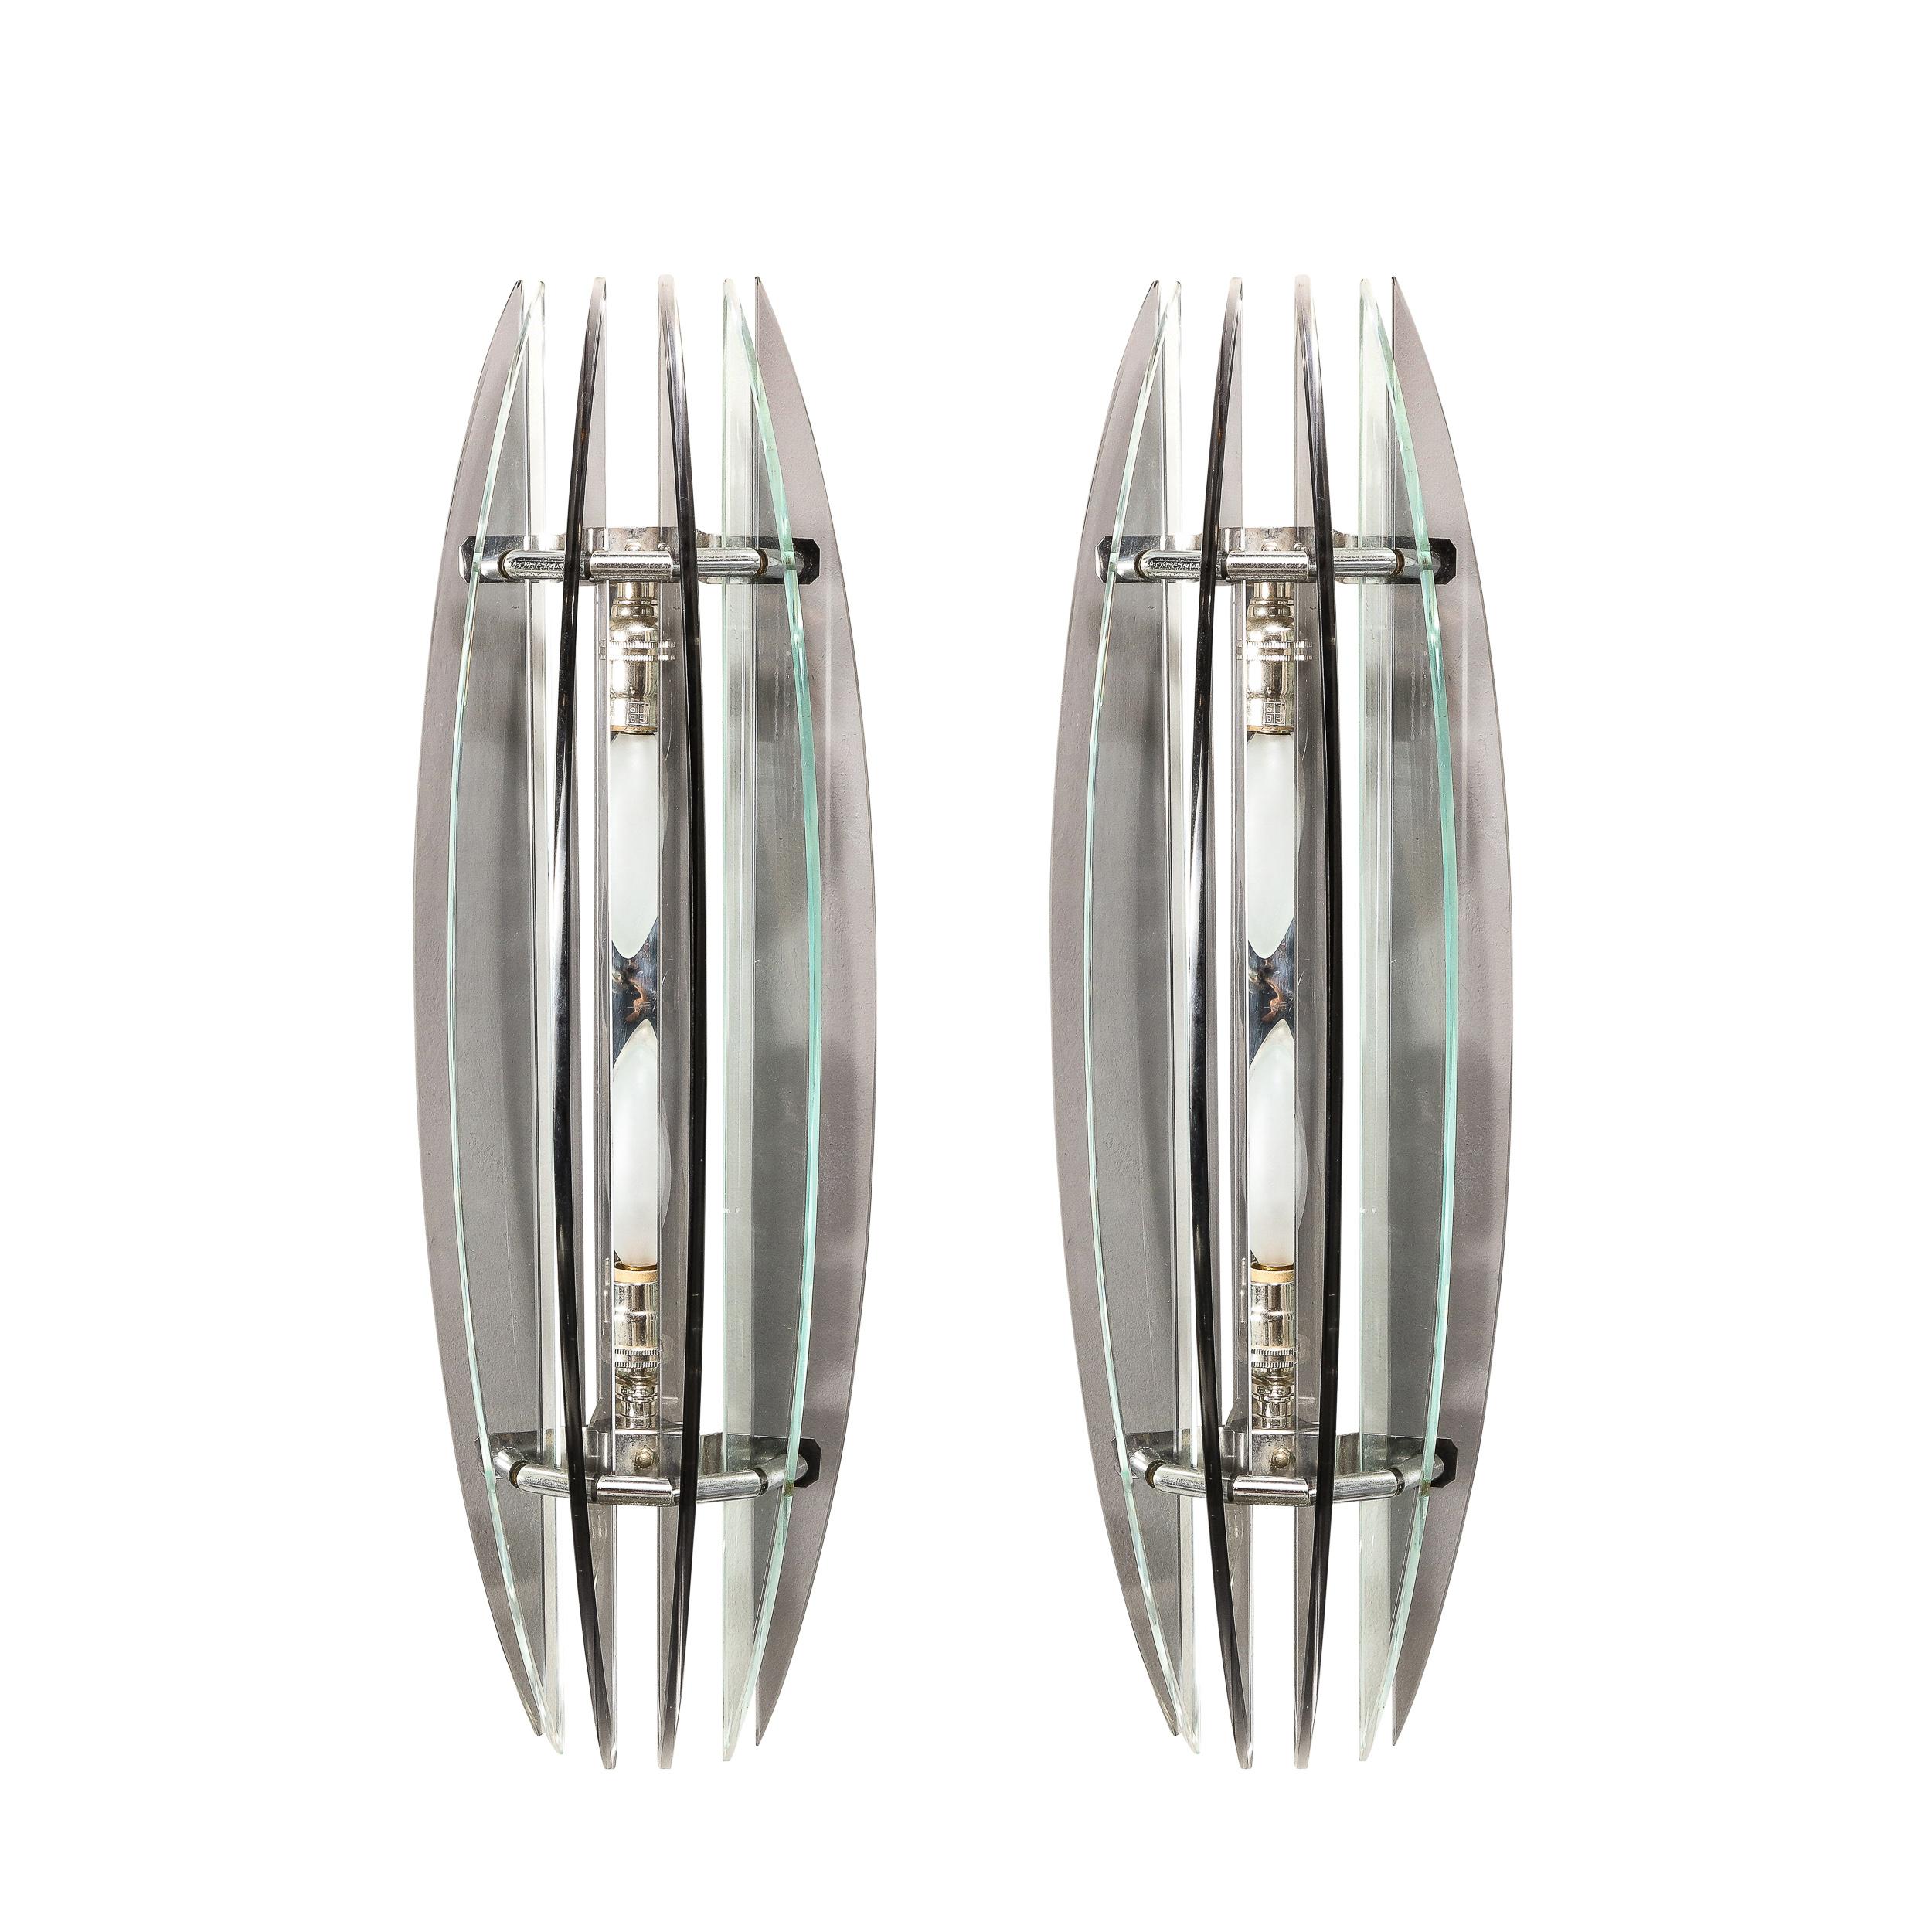 Pair of Mid-Century Modernist Curved Smoked Glass & Chrome Sconces by Veca